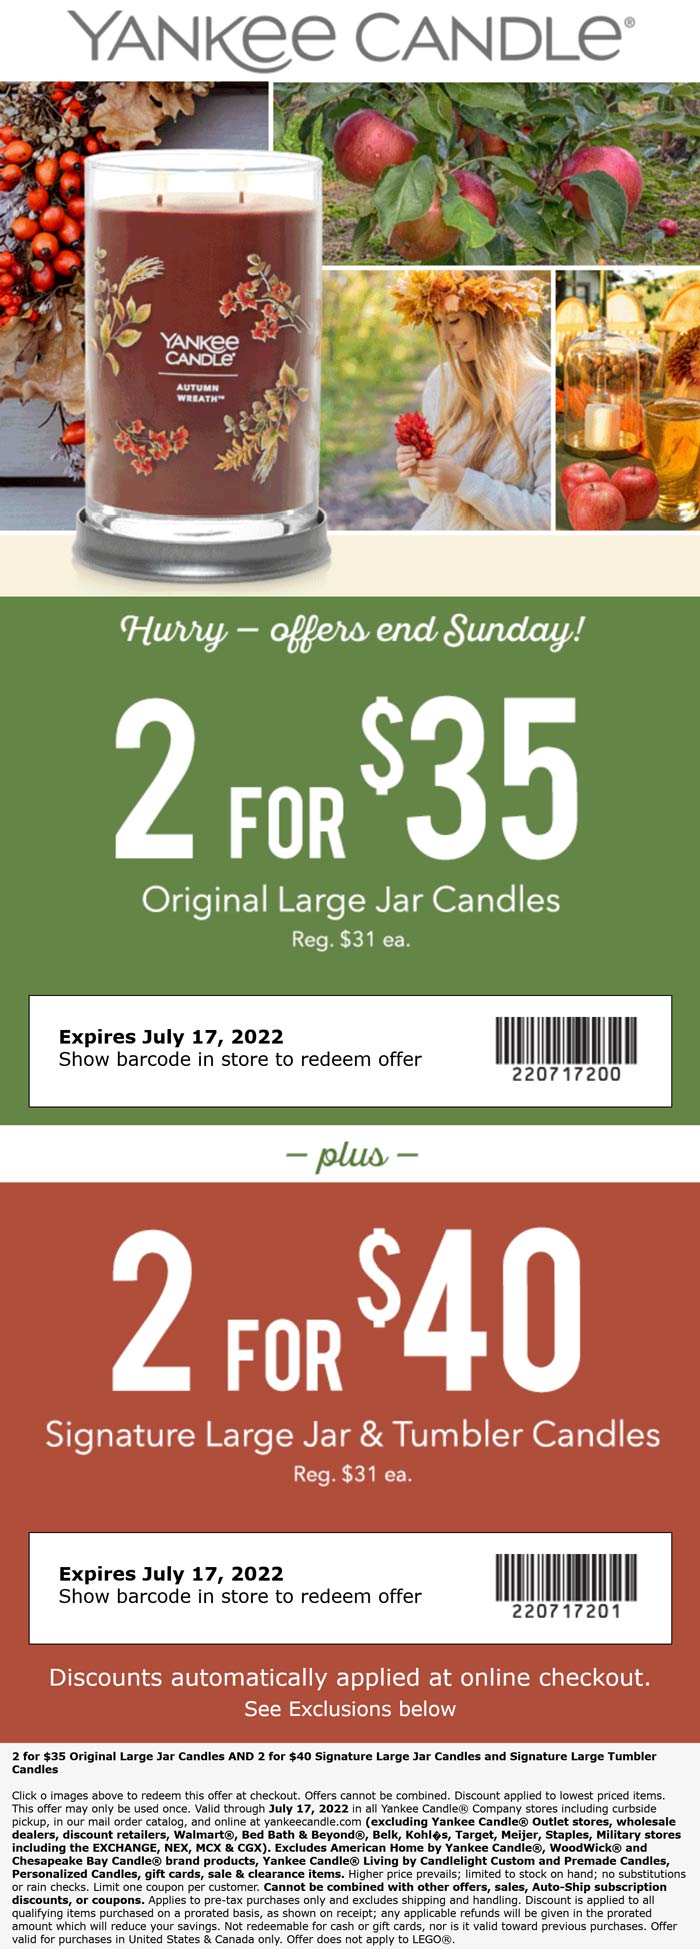 Yankee Candle stores Coupon  2 large candles for $35 at Yankee Candle #yankeecandle 